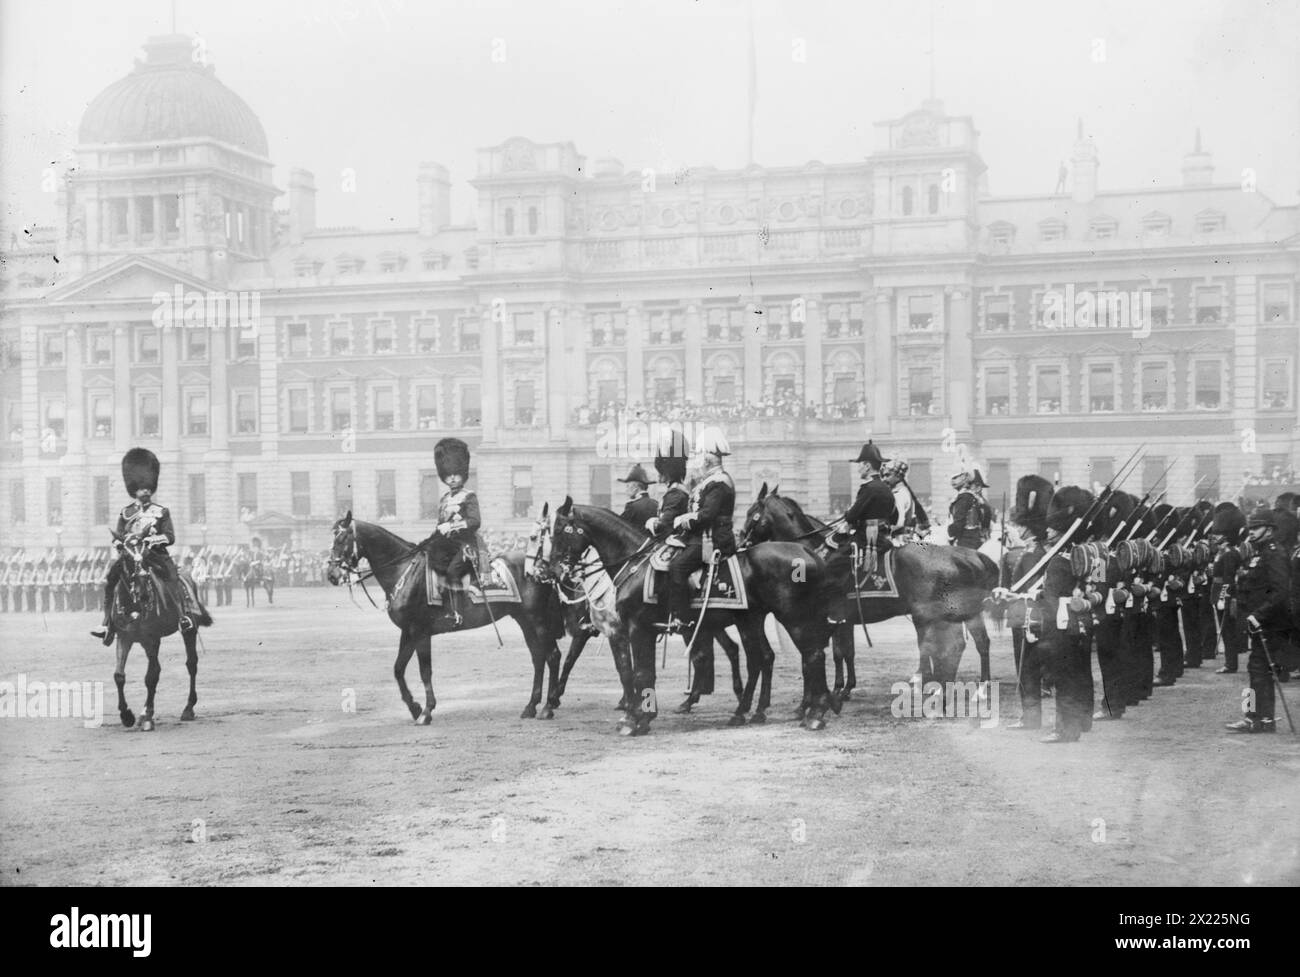 King George V at Trooping of Colors, May 1911. Shows King George V Trooping the Colour, for the first time in May 1911 in front of the Admiralty Extension Building. Both the King and the Duke of Connaught wore the uniform of the Grenadier Guards. The Maharaja of Bikaner also attended. Stock Photo